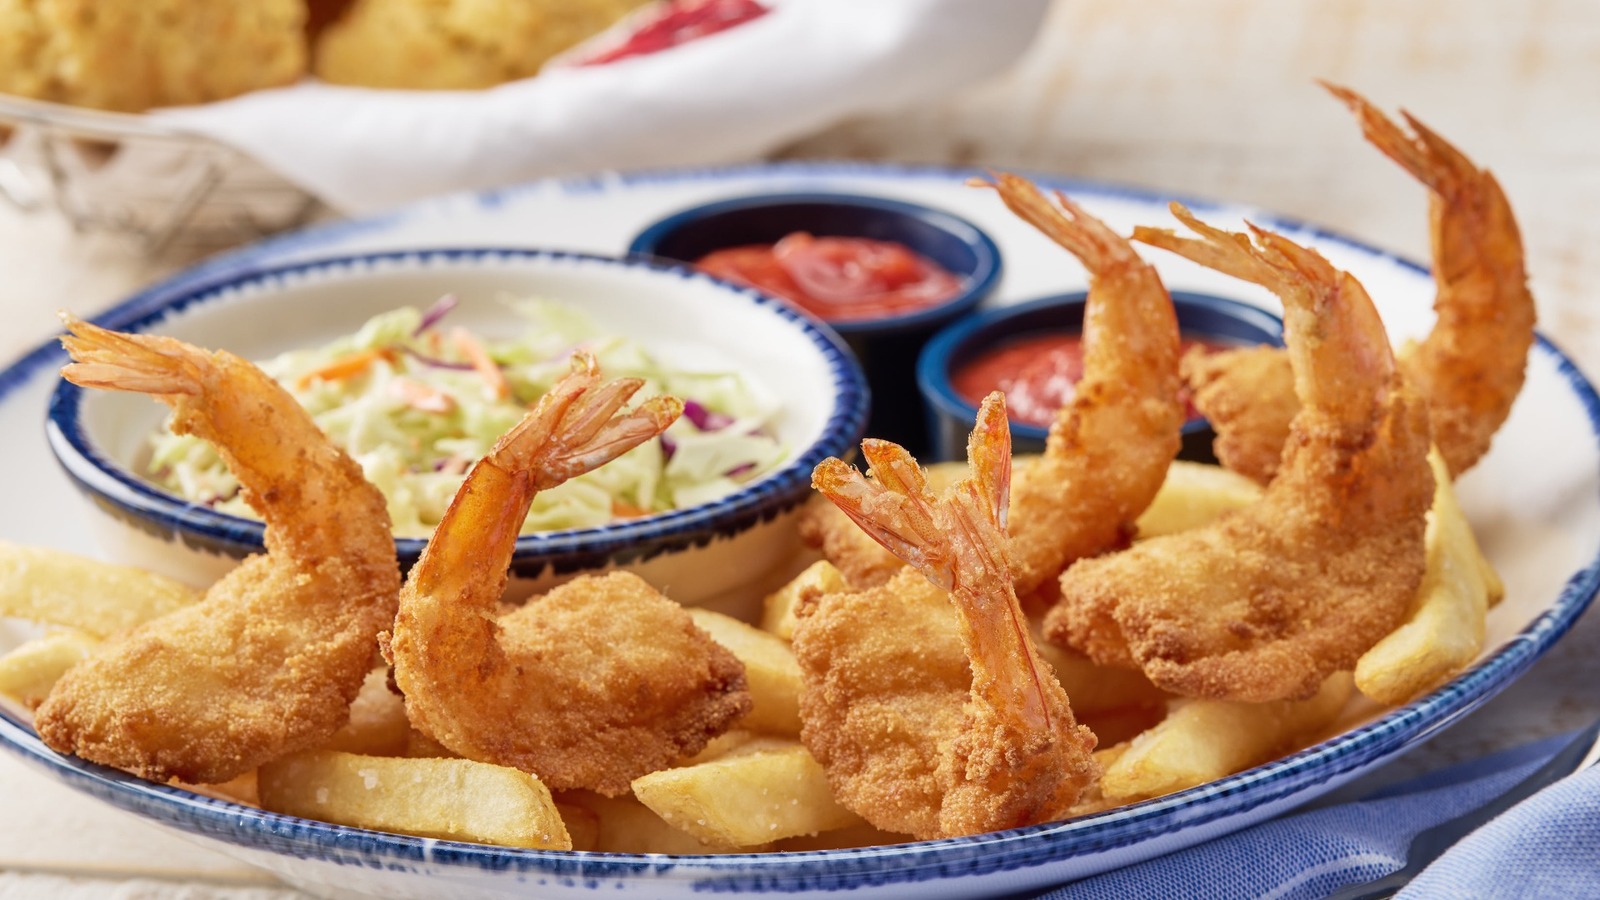 Red Lobster And Bonefish Grill Are Offering Free Shrimp For Veterans Day